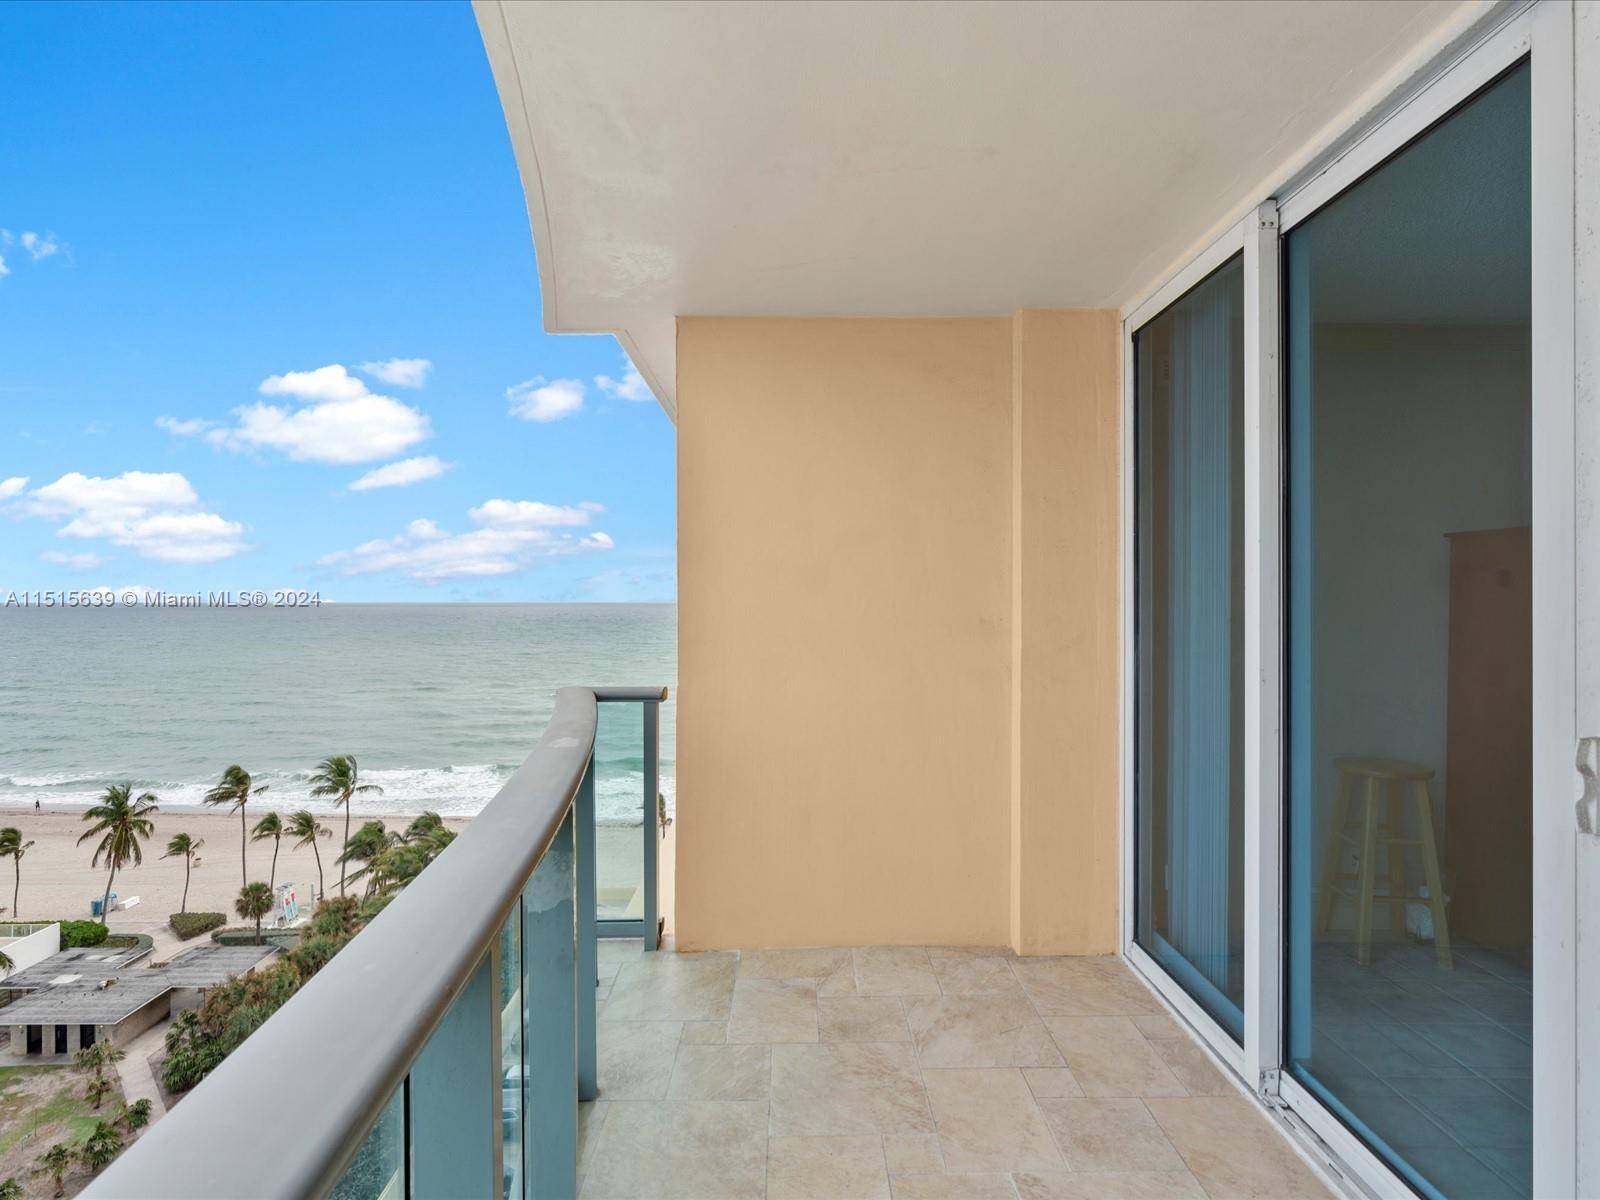 Breathtaking ocean views await you on the 11th floor of The Wave, a premier building in Hollywood Beach.